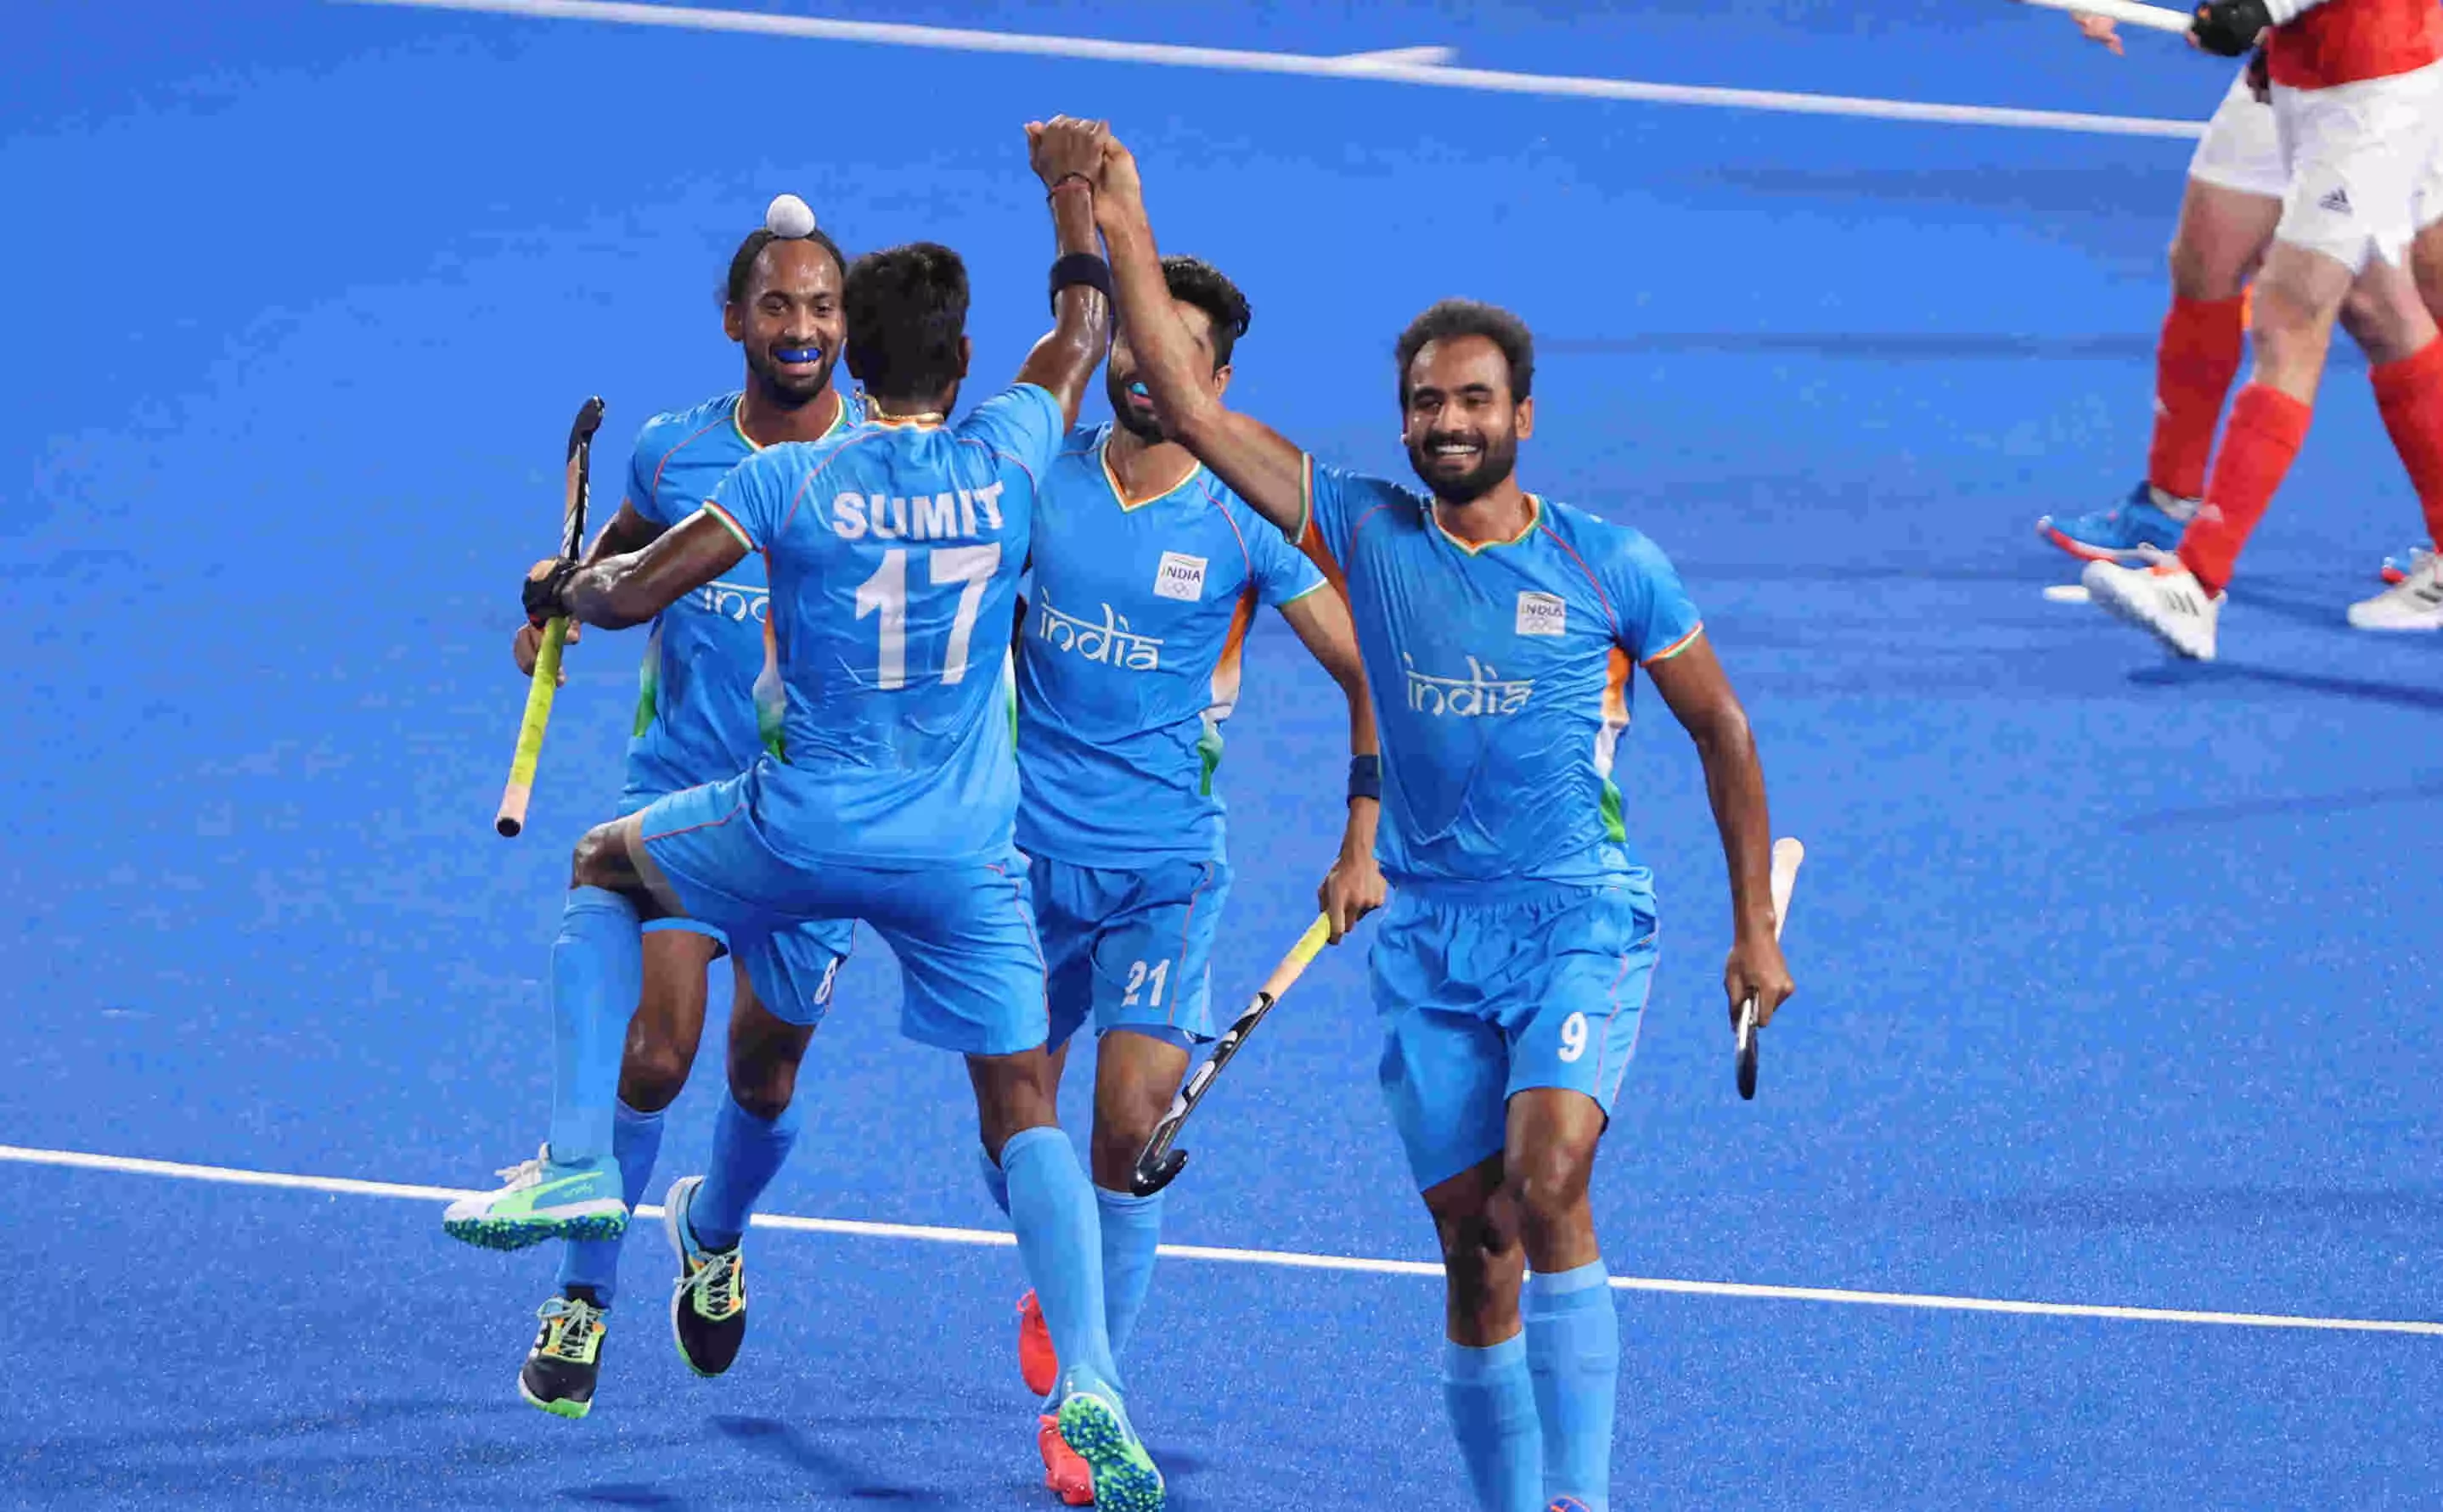 Hockey: India into the Semi final — Why it's the greatest moment to cherish